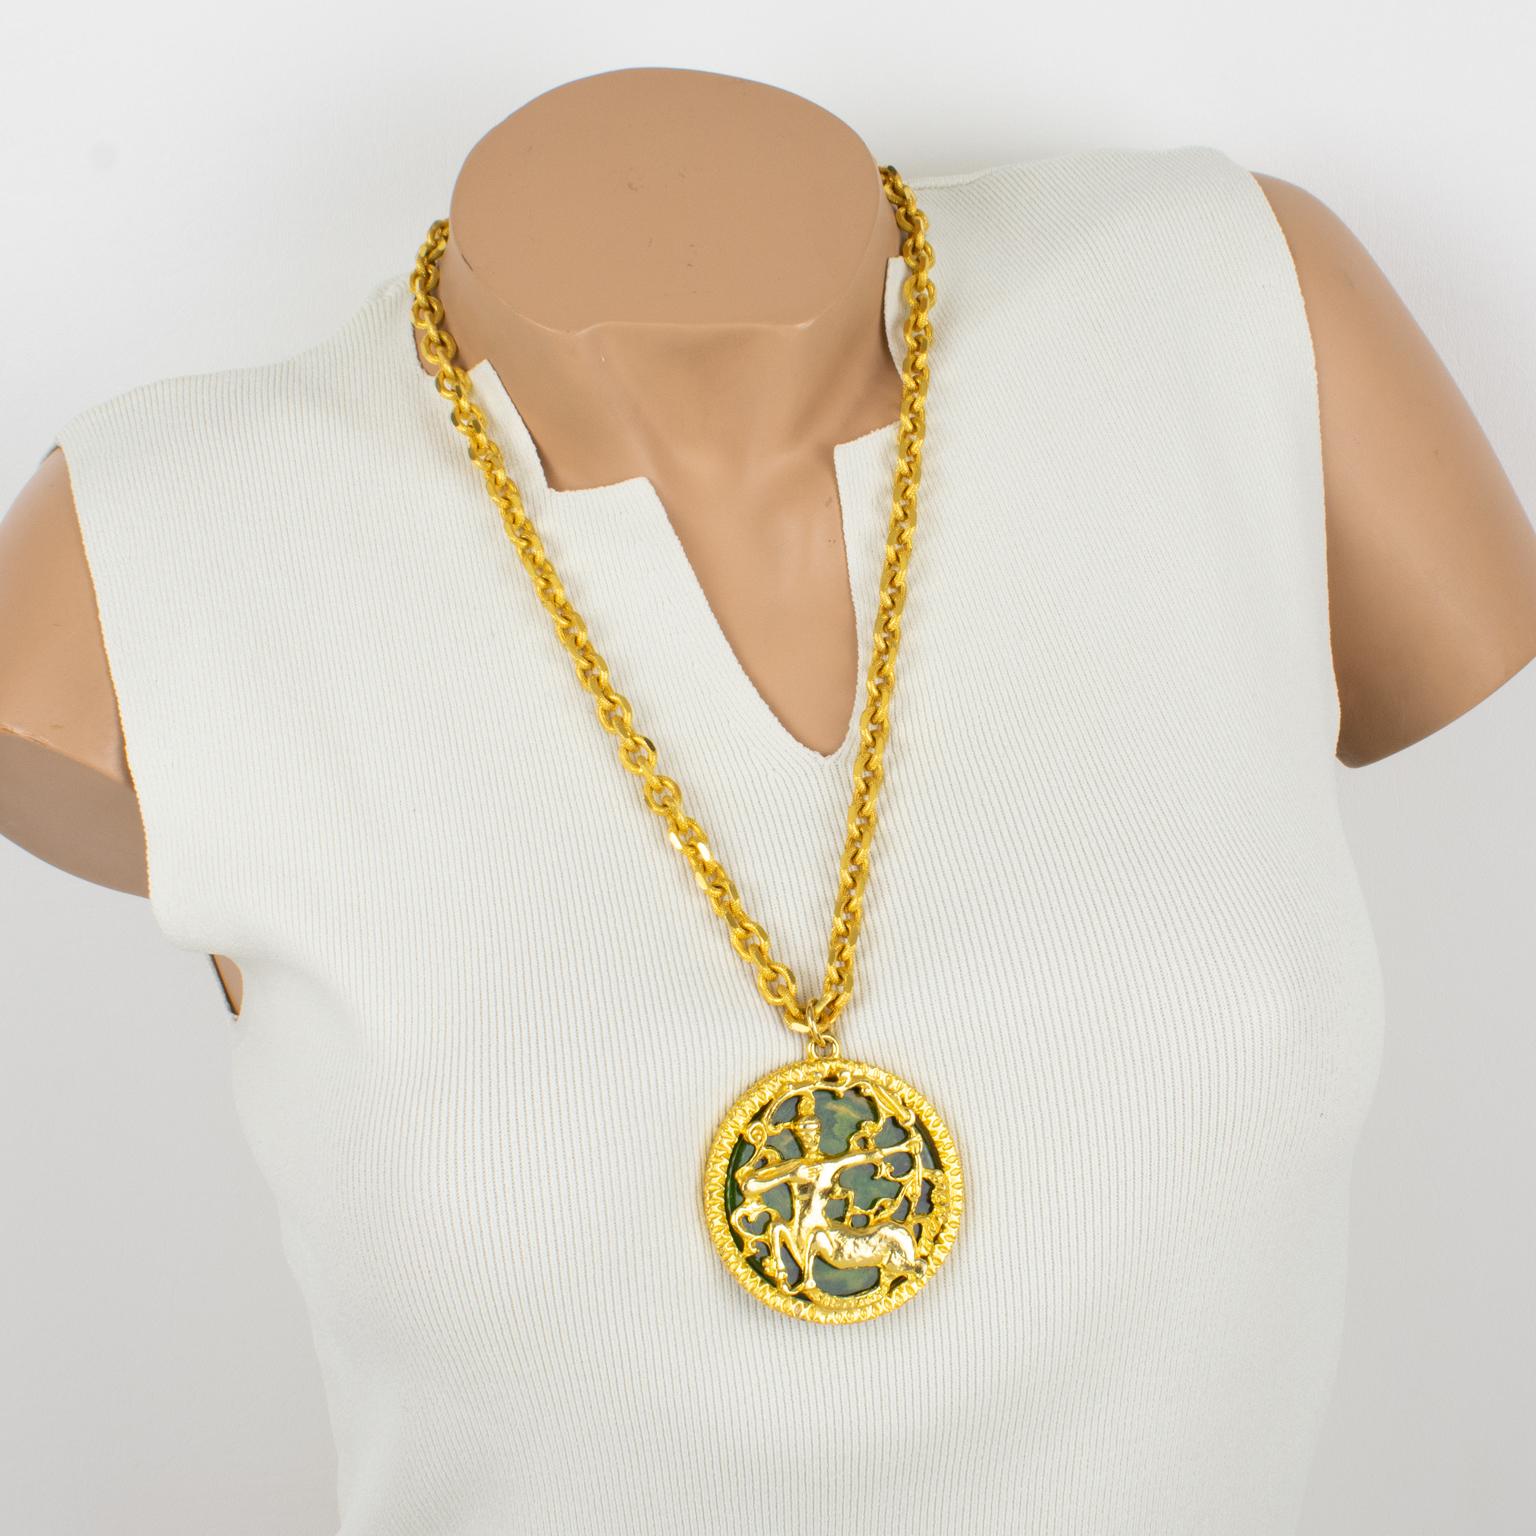 This spectacular Pauline Rader necklace features a massive dimensional pendant design with shiny gilded metal framing embellished with a green spinach marble Bakelite background. The pendant has a lovely intricate centaur carved and see-thru design.